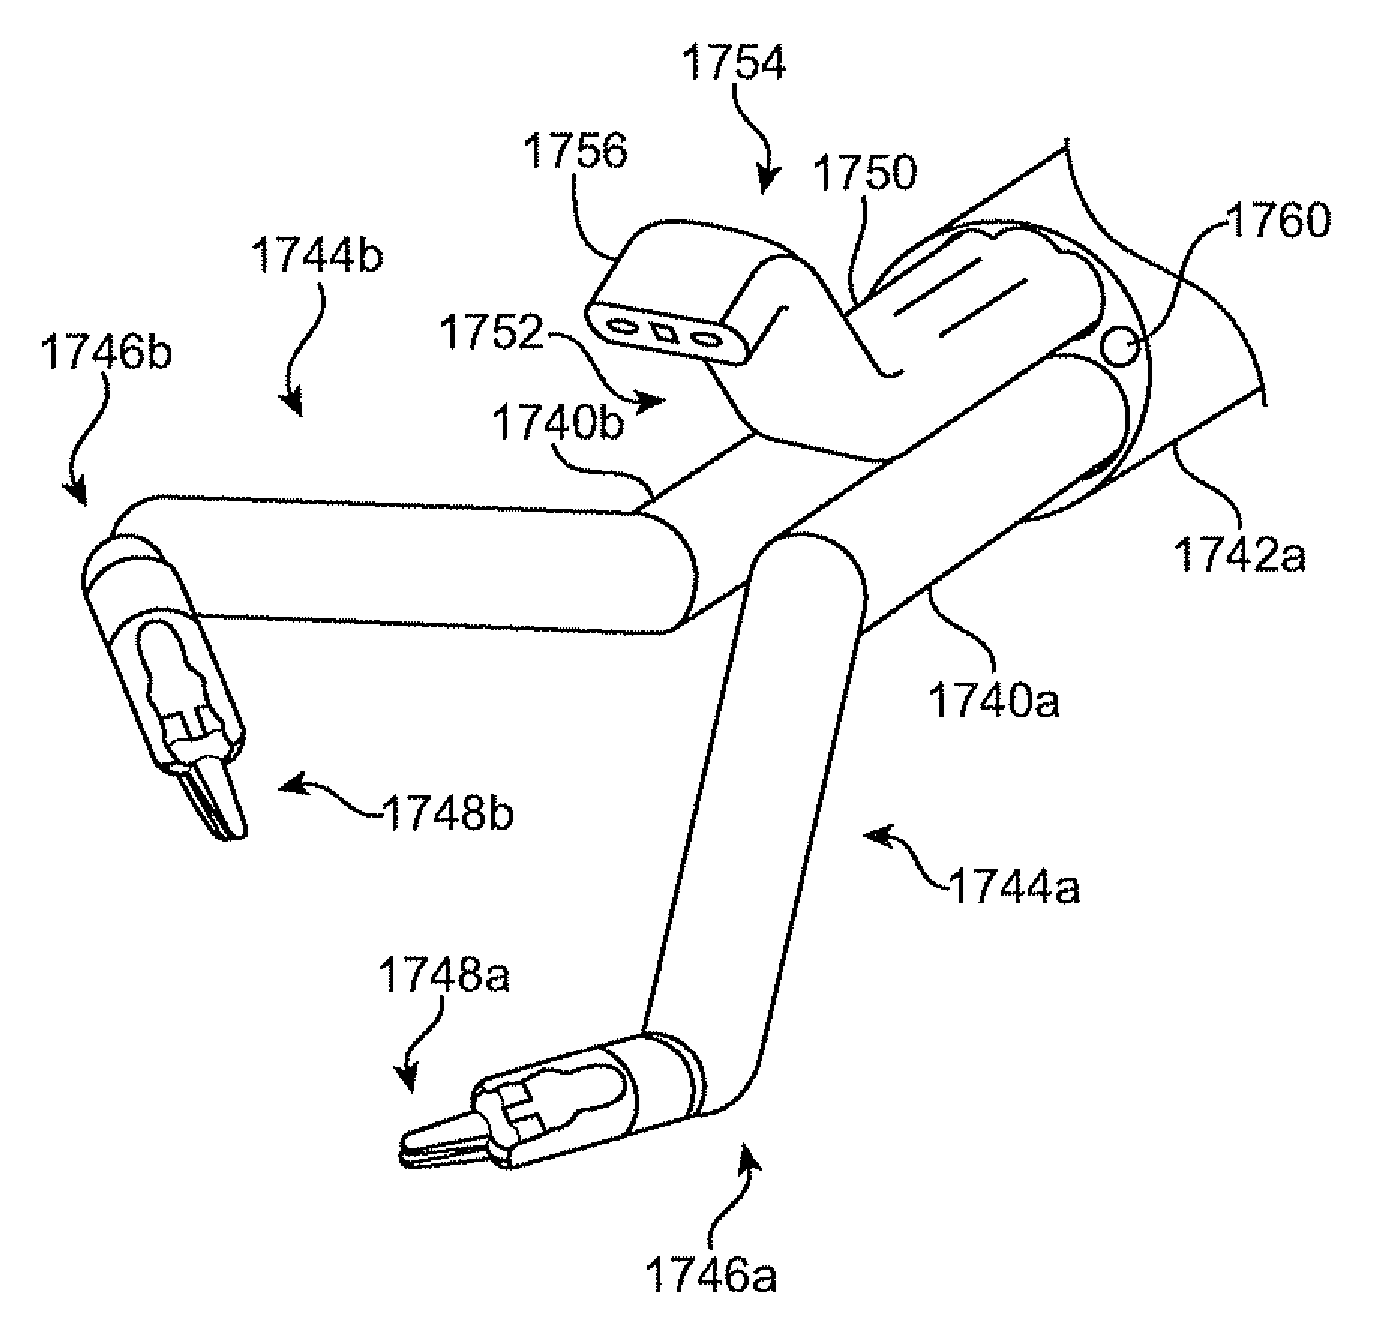 Minimally invasive surgical system